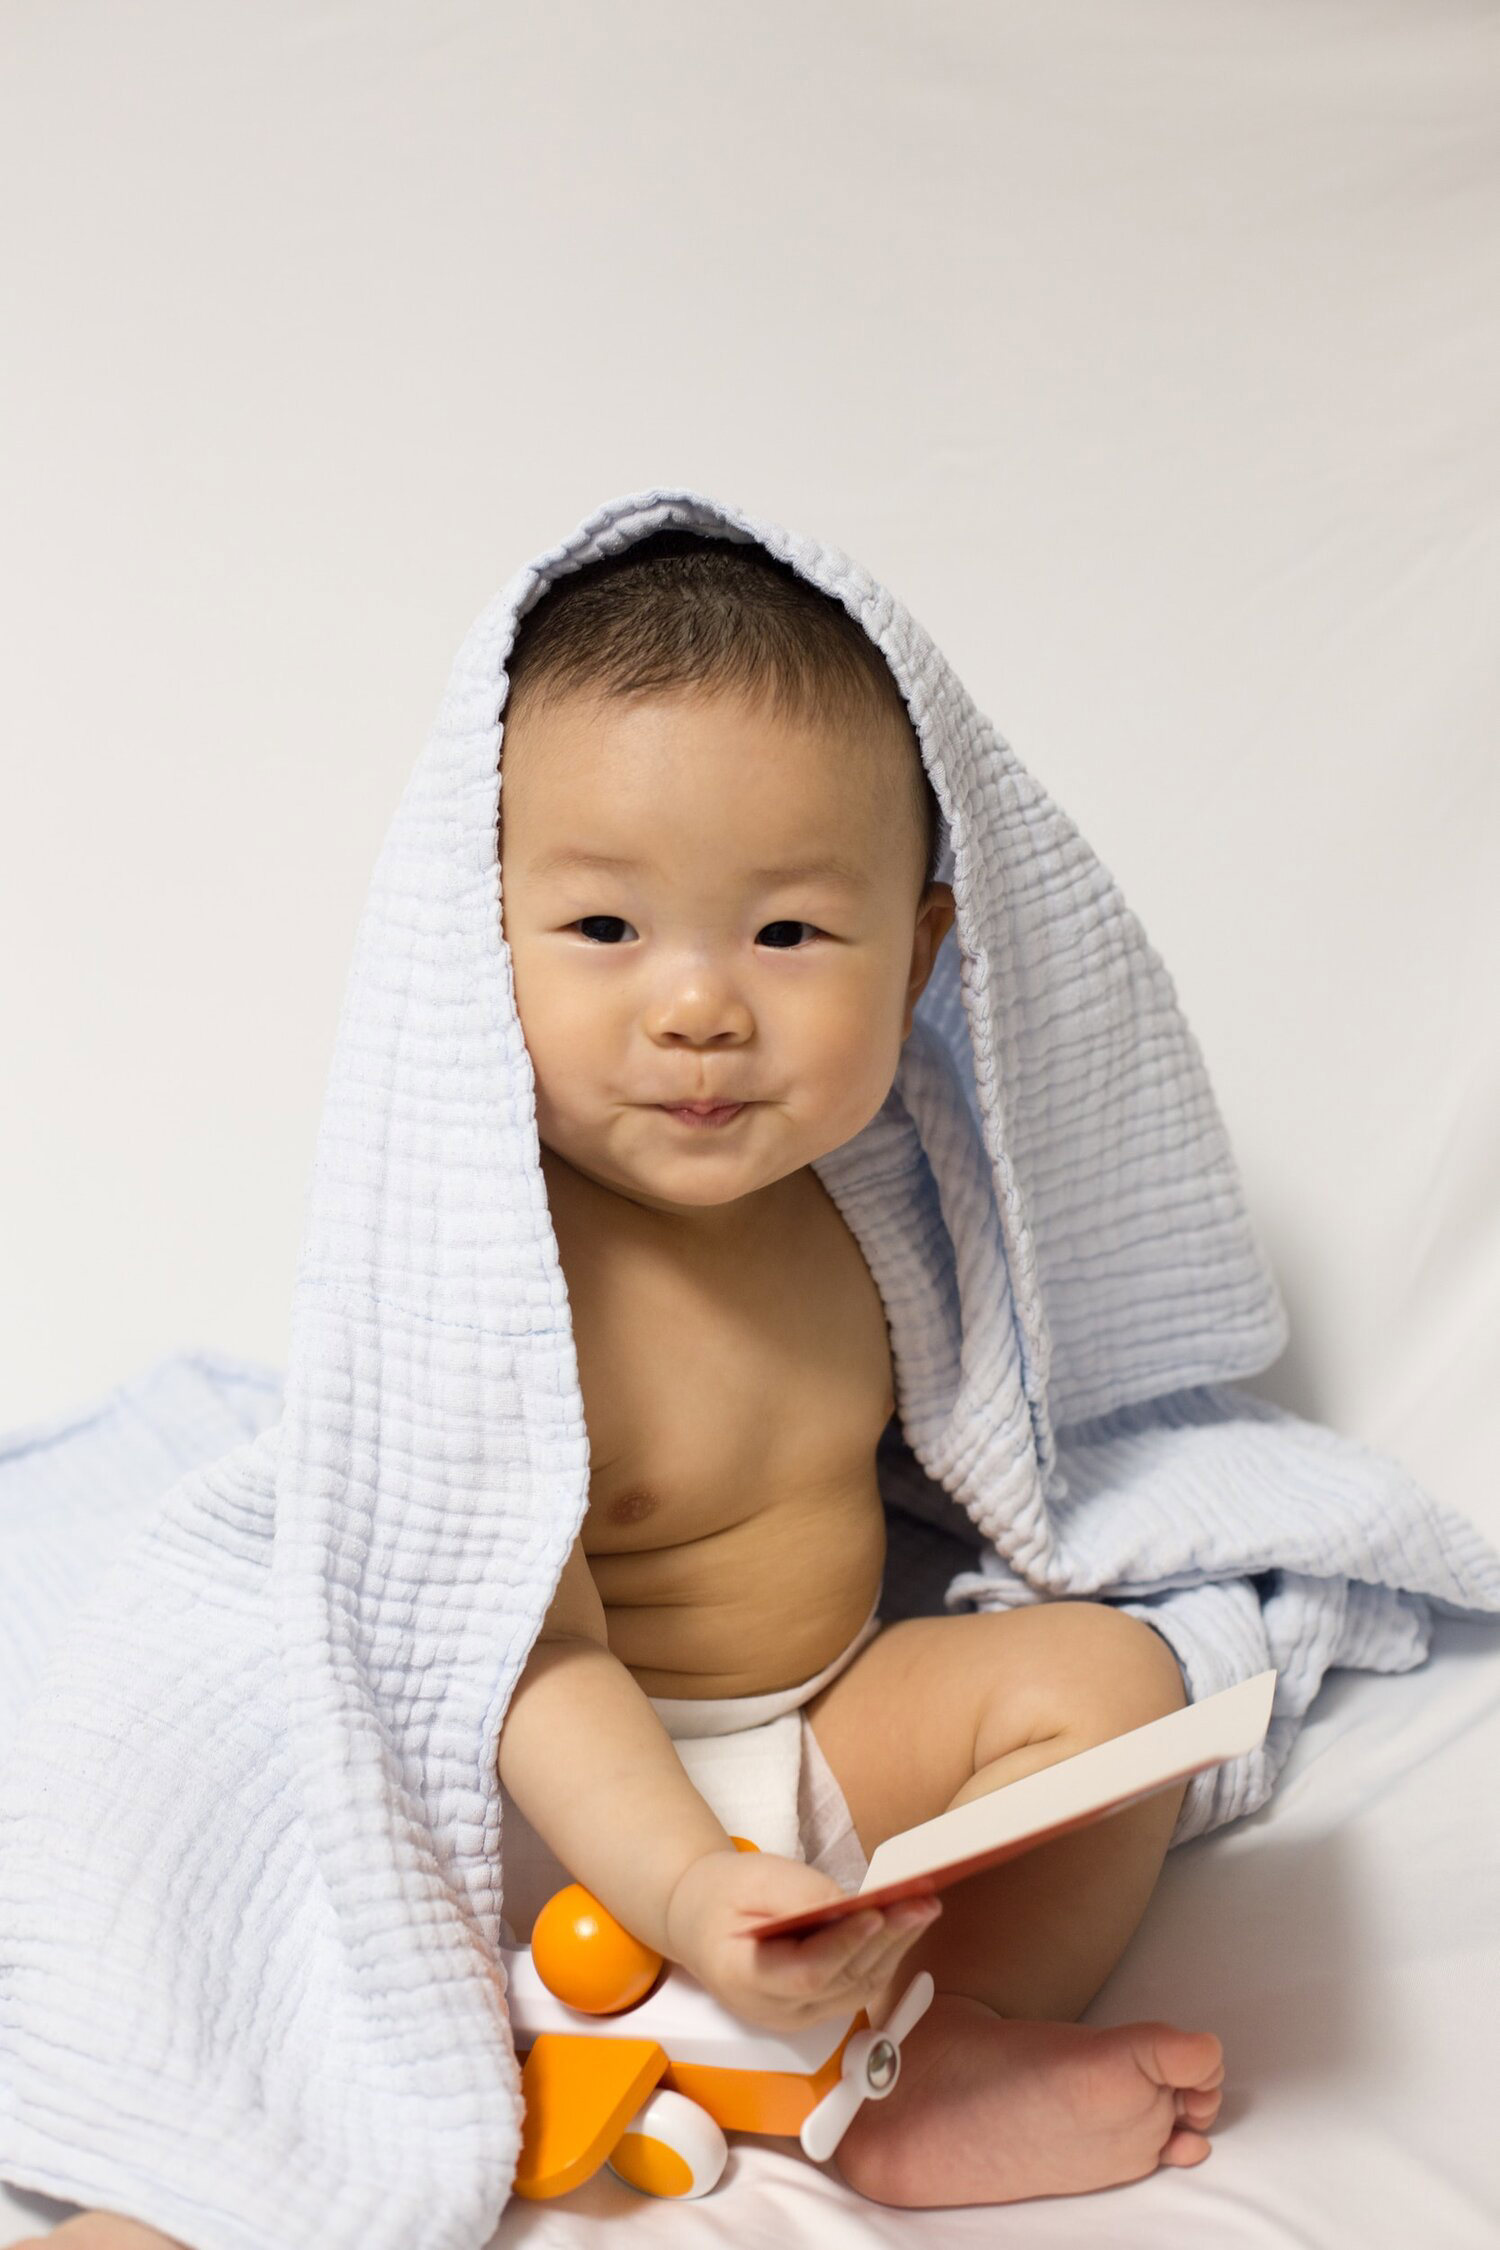 Charming Choices: 49 Baby Names Starting With 'cho'